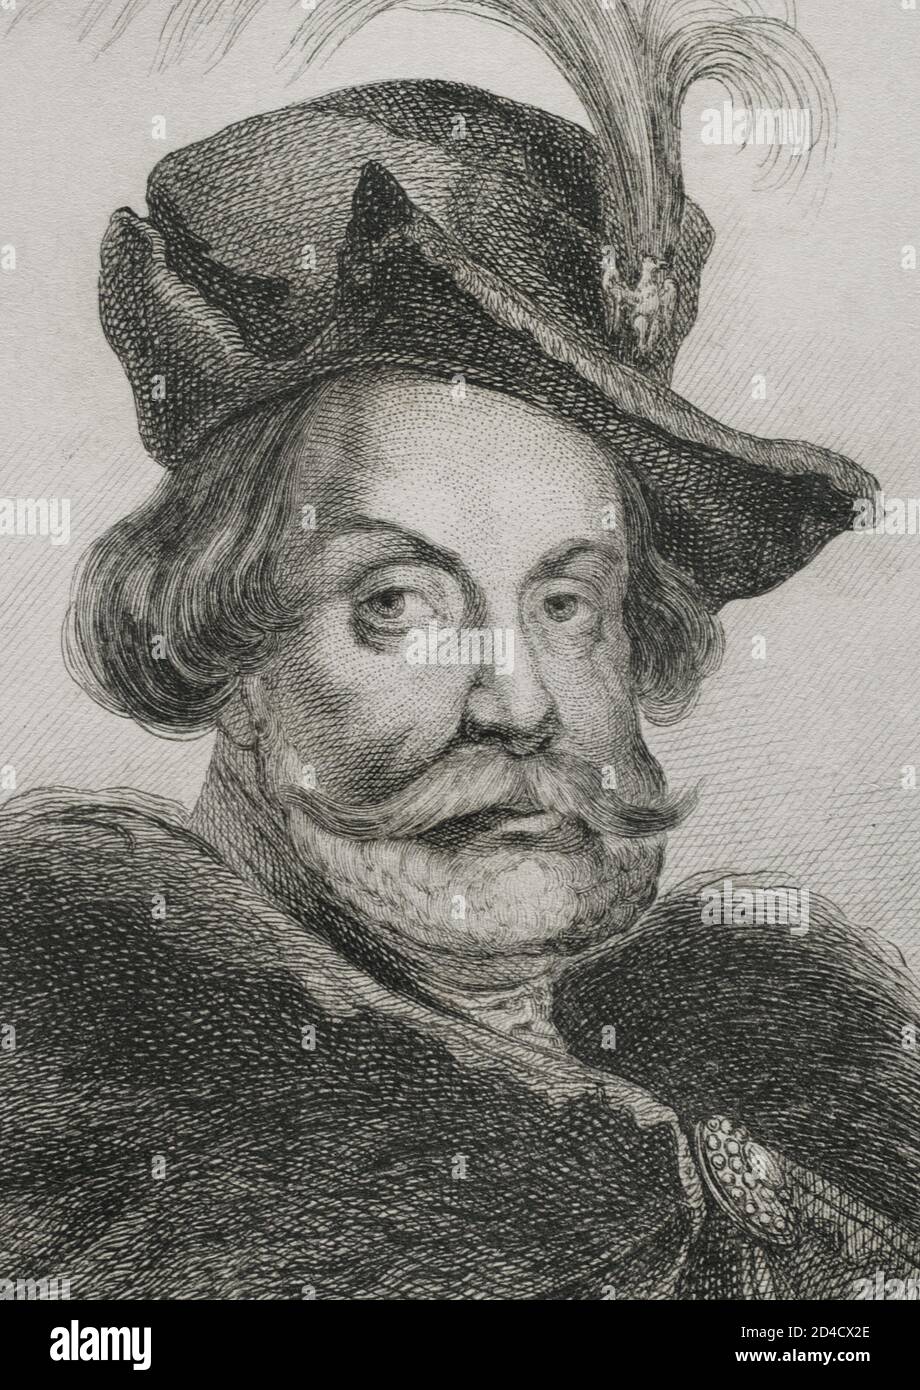 Wladyslaw IV Vasa (1595-1648). King of Poland (1632-1648). Grand Duke of Lithuania and titular king of Sweden. He was the eldest son of Sigismund III Vasa and Anna Habsburg of Austria. Portrait. Engraving by Lemaitre, Vernier and Massard. History of Poland, by Charles Foster. Panorama Universal, 1840. Stock Photo